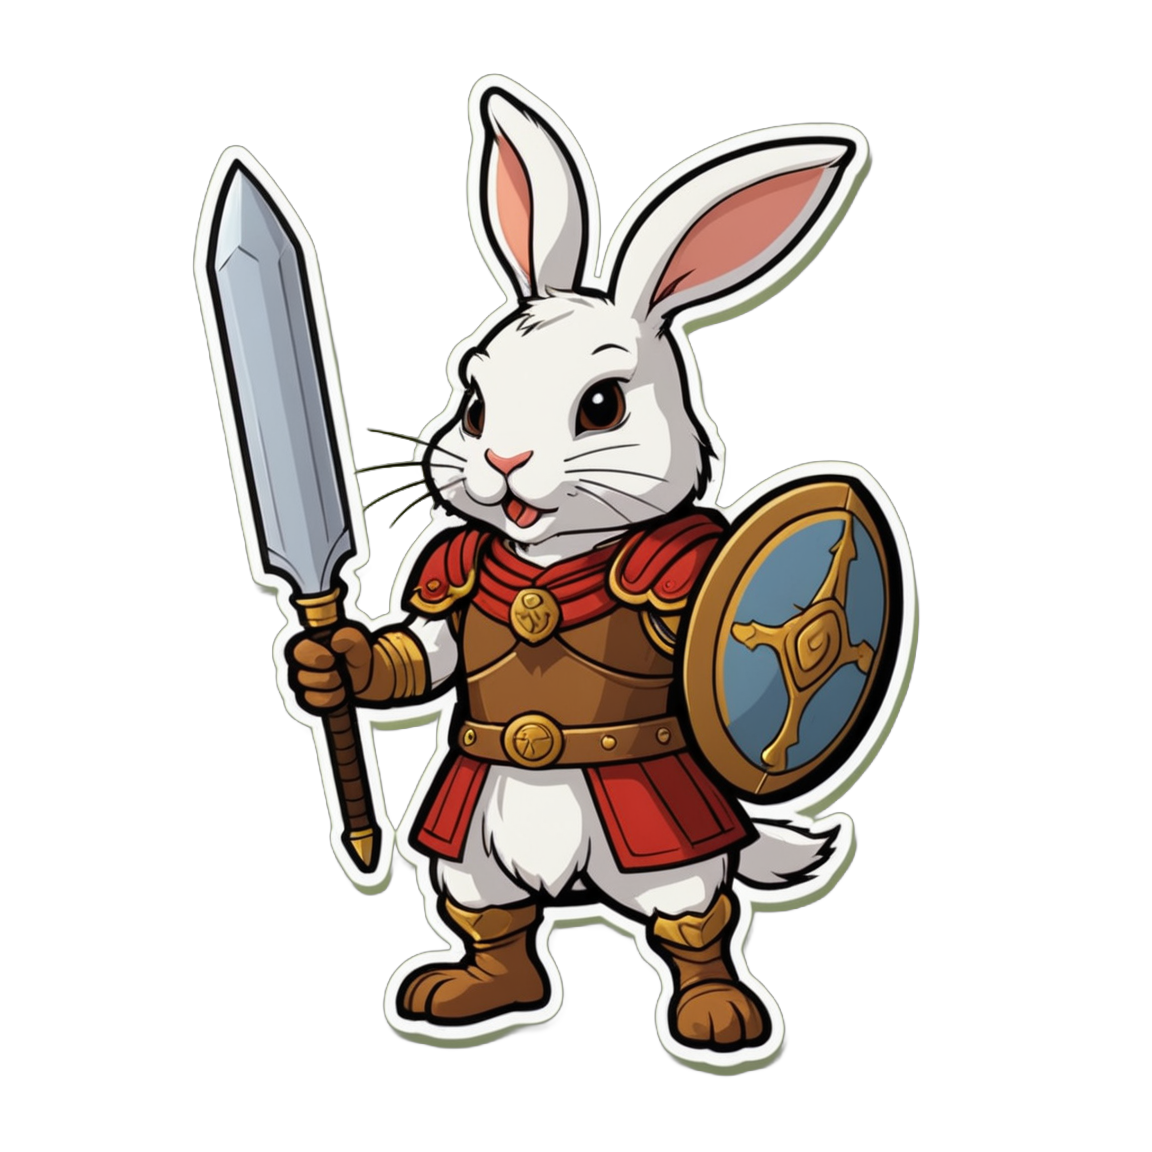 An intrepid rabbit as a Roman gladiator, wearing a helmet fashioned from an acorn, in a fierce stance